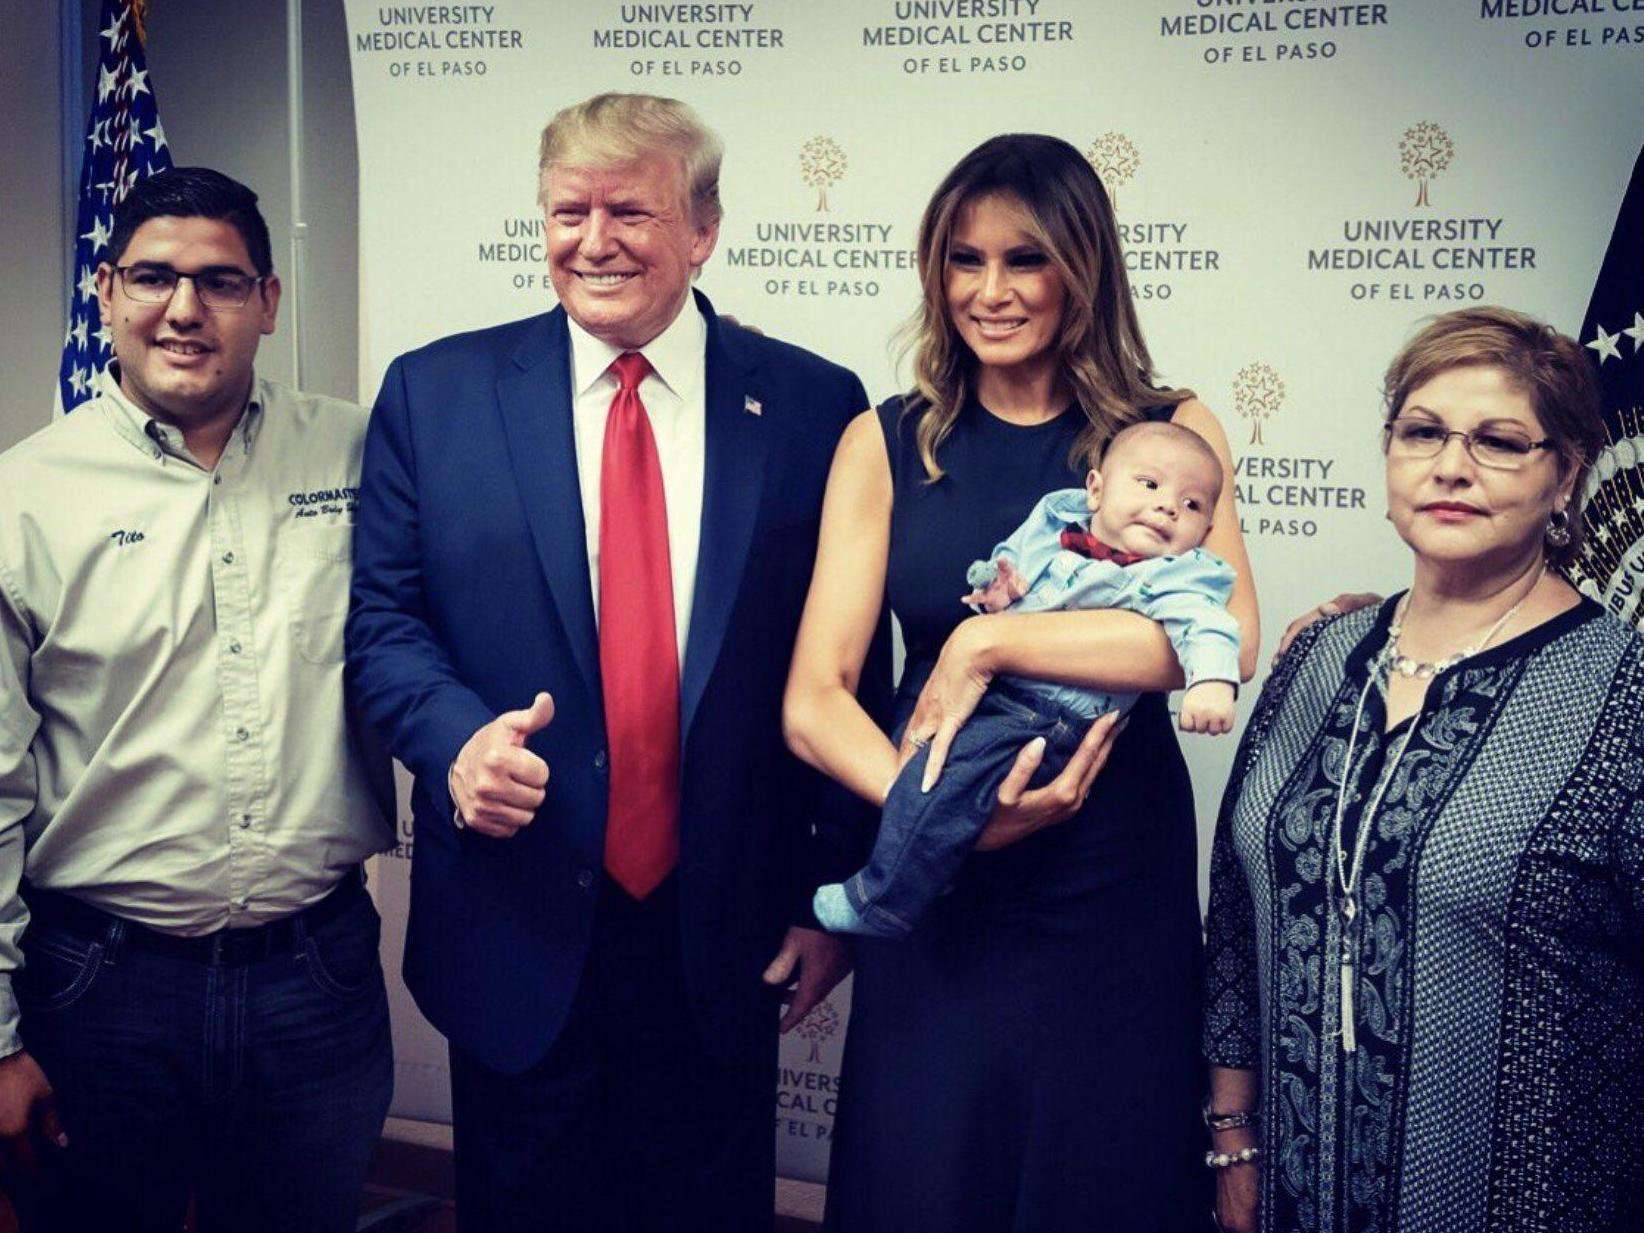 image for Grinning Trump gives thumbs-up with baby whose parents were shot dead in El Paso terror attack